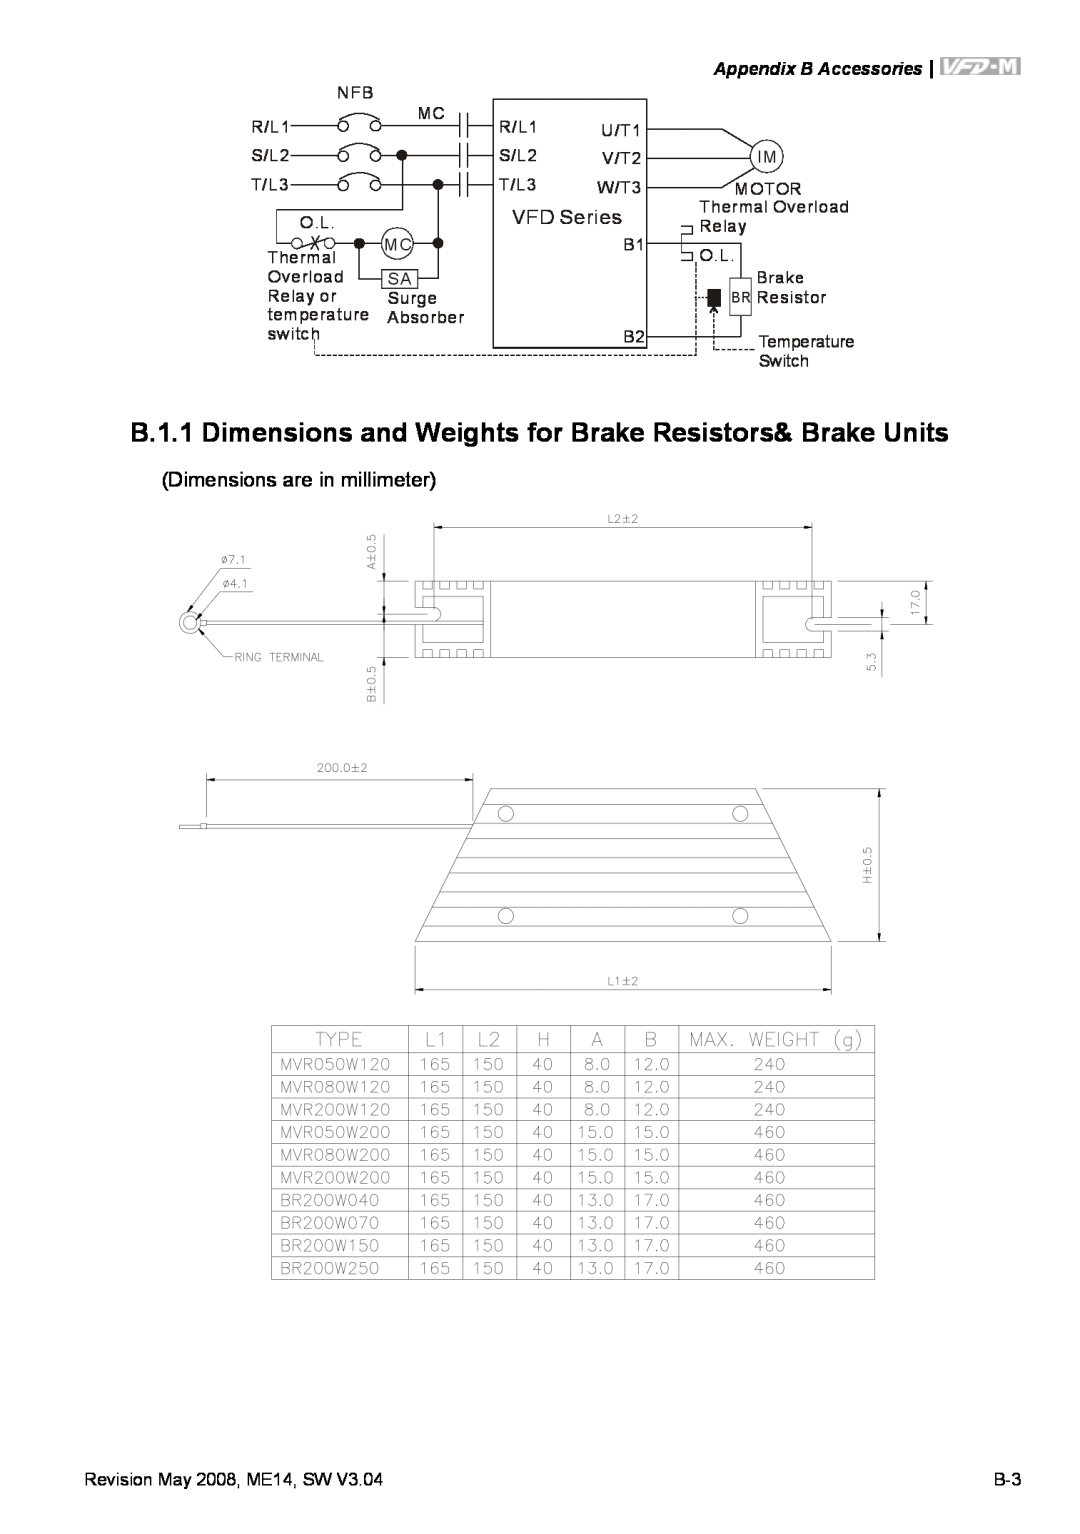 Delta Electronics VFD-M manual B.1.1 Dimensions and Weights for Brake Resistors& Brake Units, Dimensions are in millimeter 